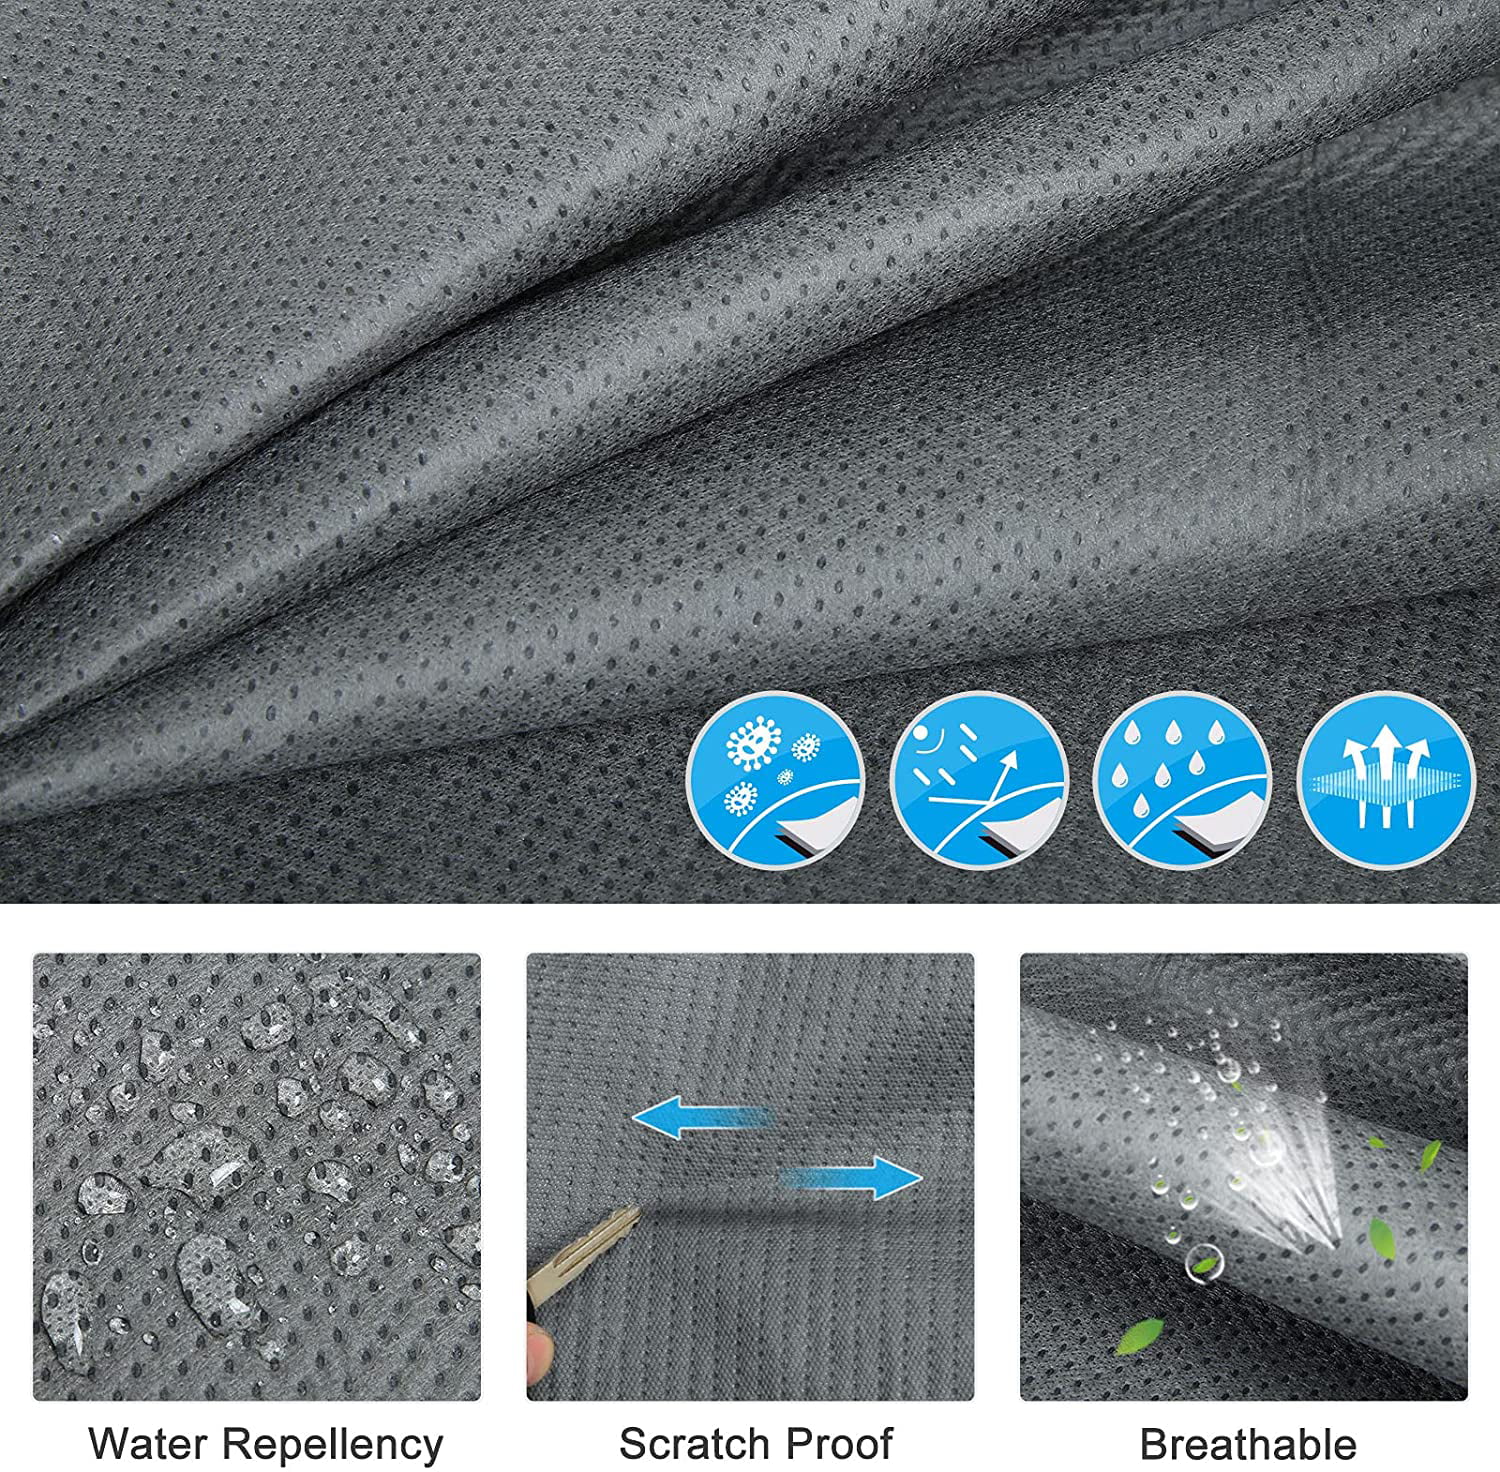 Anti-uv Prevent Top Tearing Caused by Sun Exposure RVMasking 2021 Upgraded 6 Layers Top Travel Trailer RV Cover Windproof Camper Cover Up to 18 1-20 RVwith 4 Tire Covers Tongue Jack Cover 